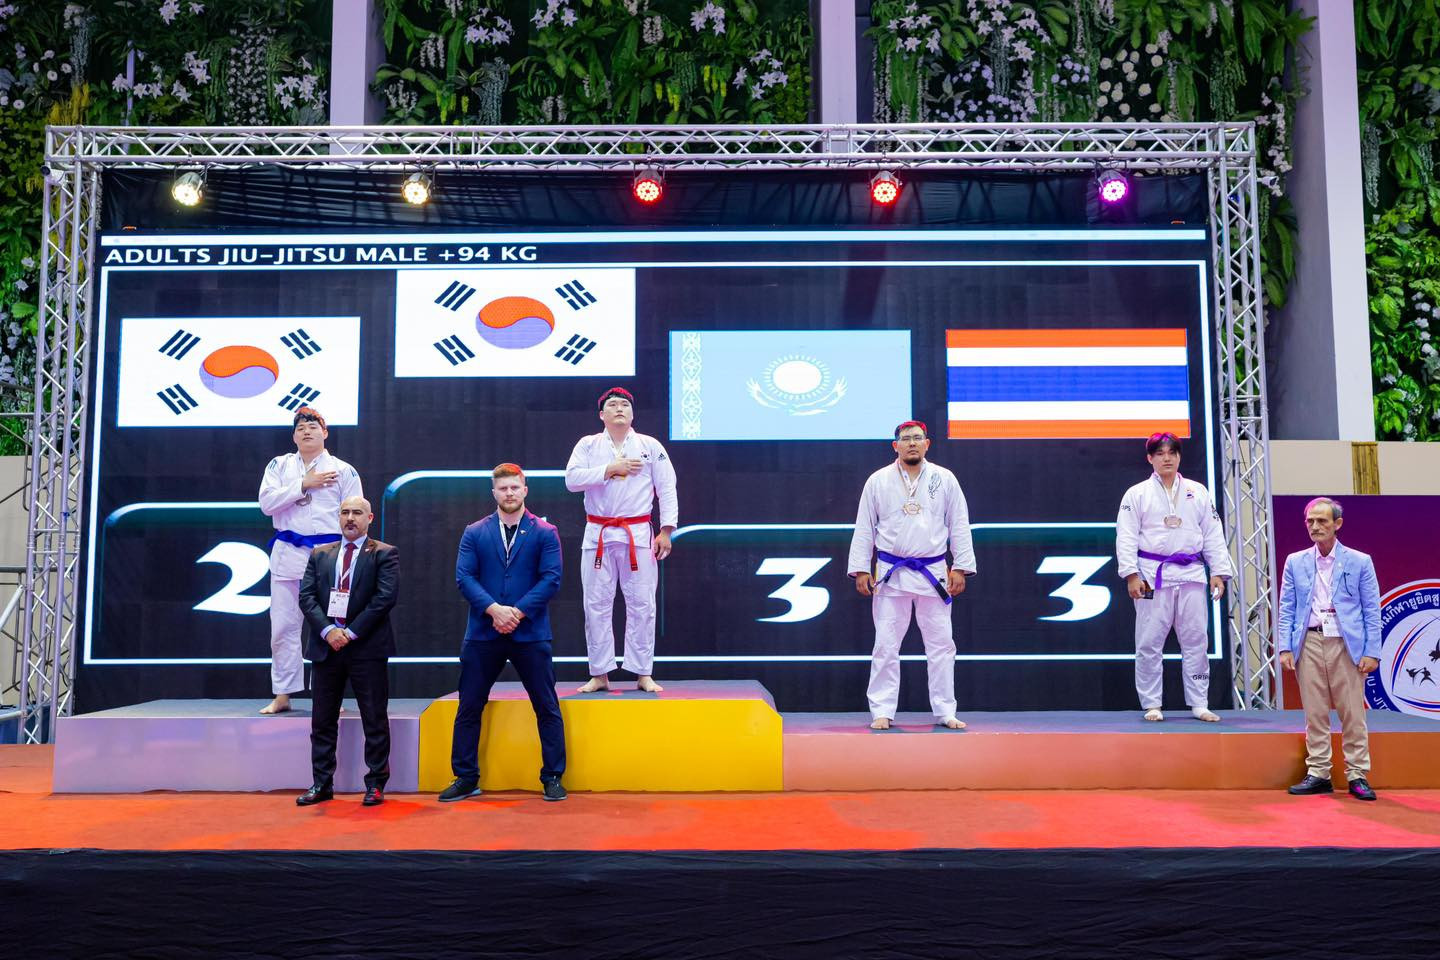 South Korea's Youk Jun-il, centre, ended the day's competition with a fantastic win over compatriot Lee Jong-ku, left, in the men's over-94kg class ©JJAU